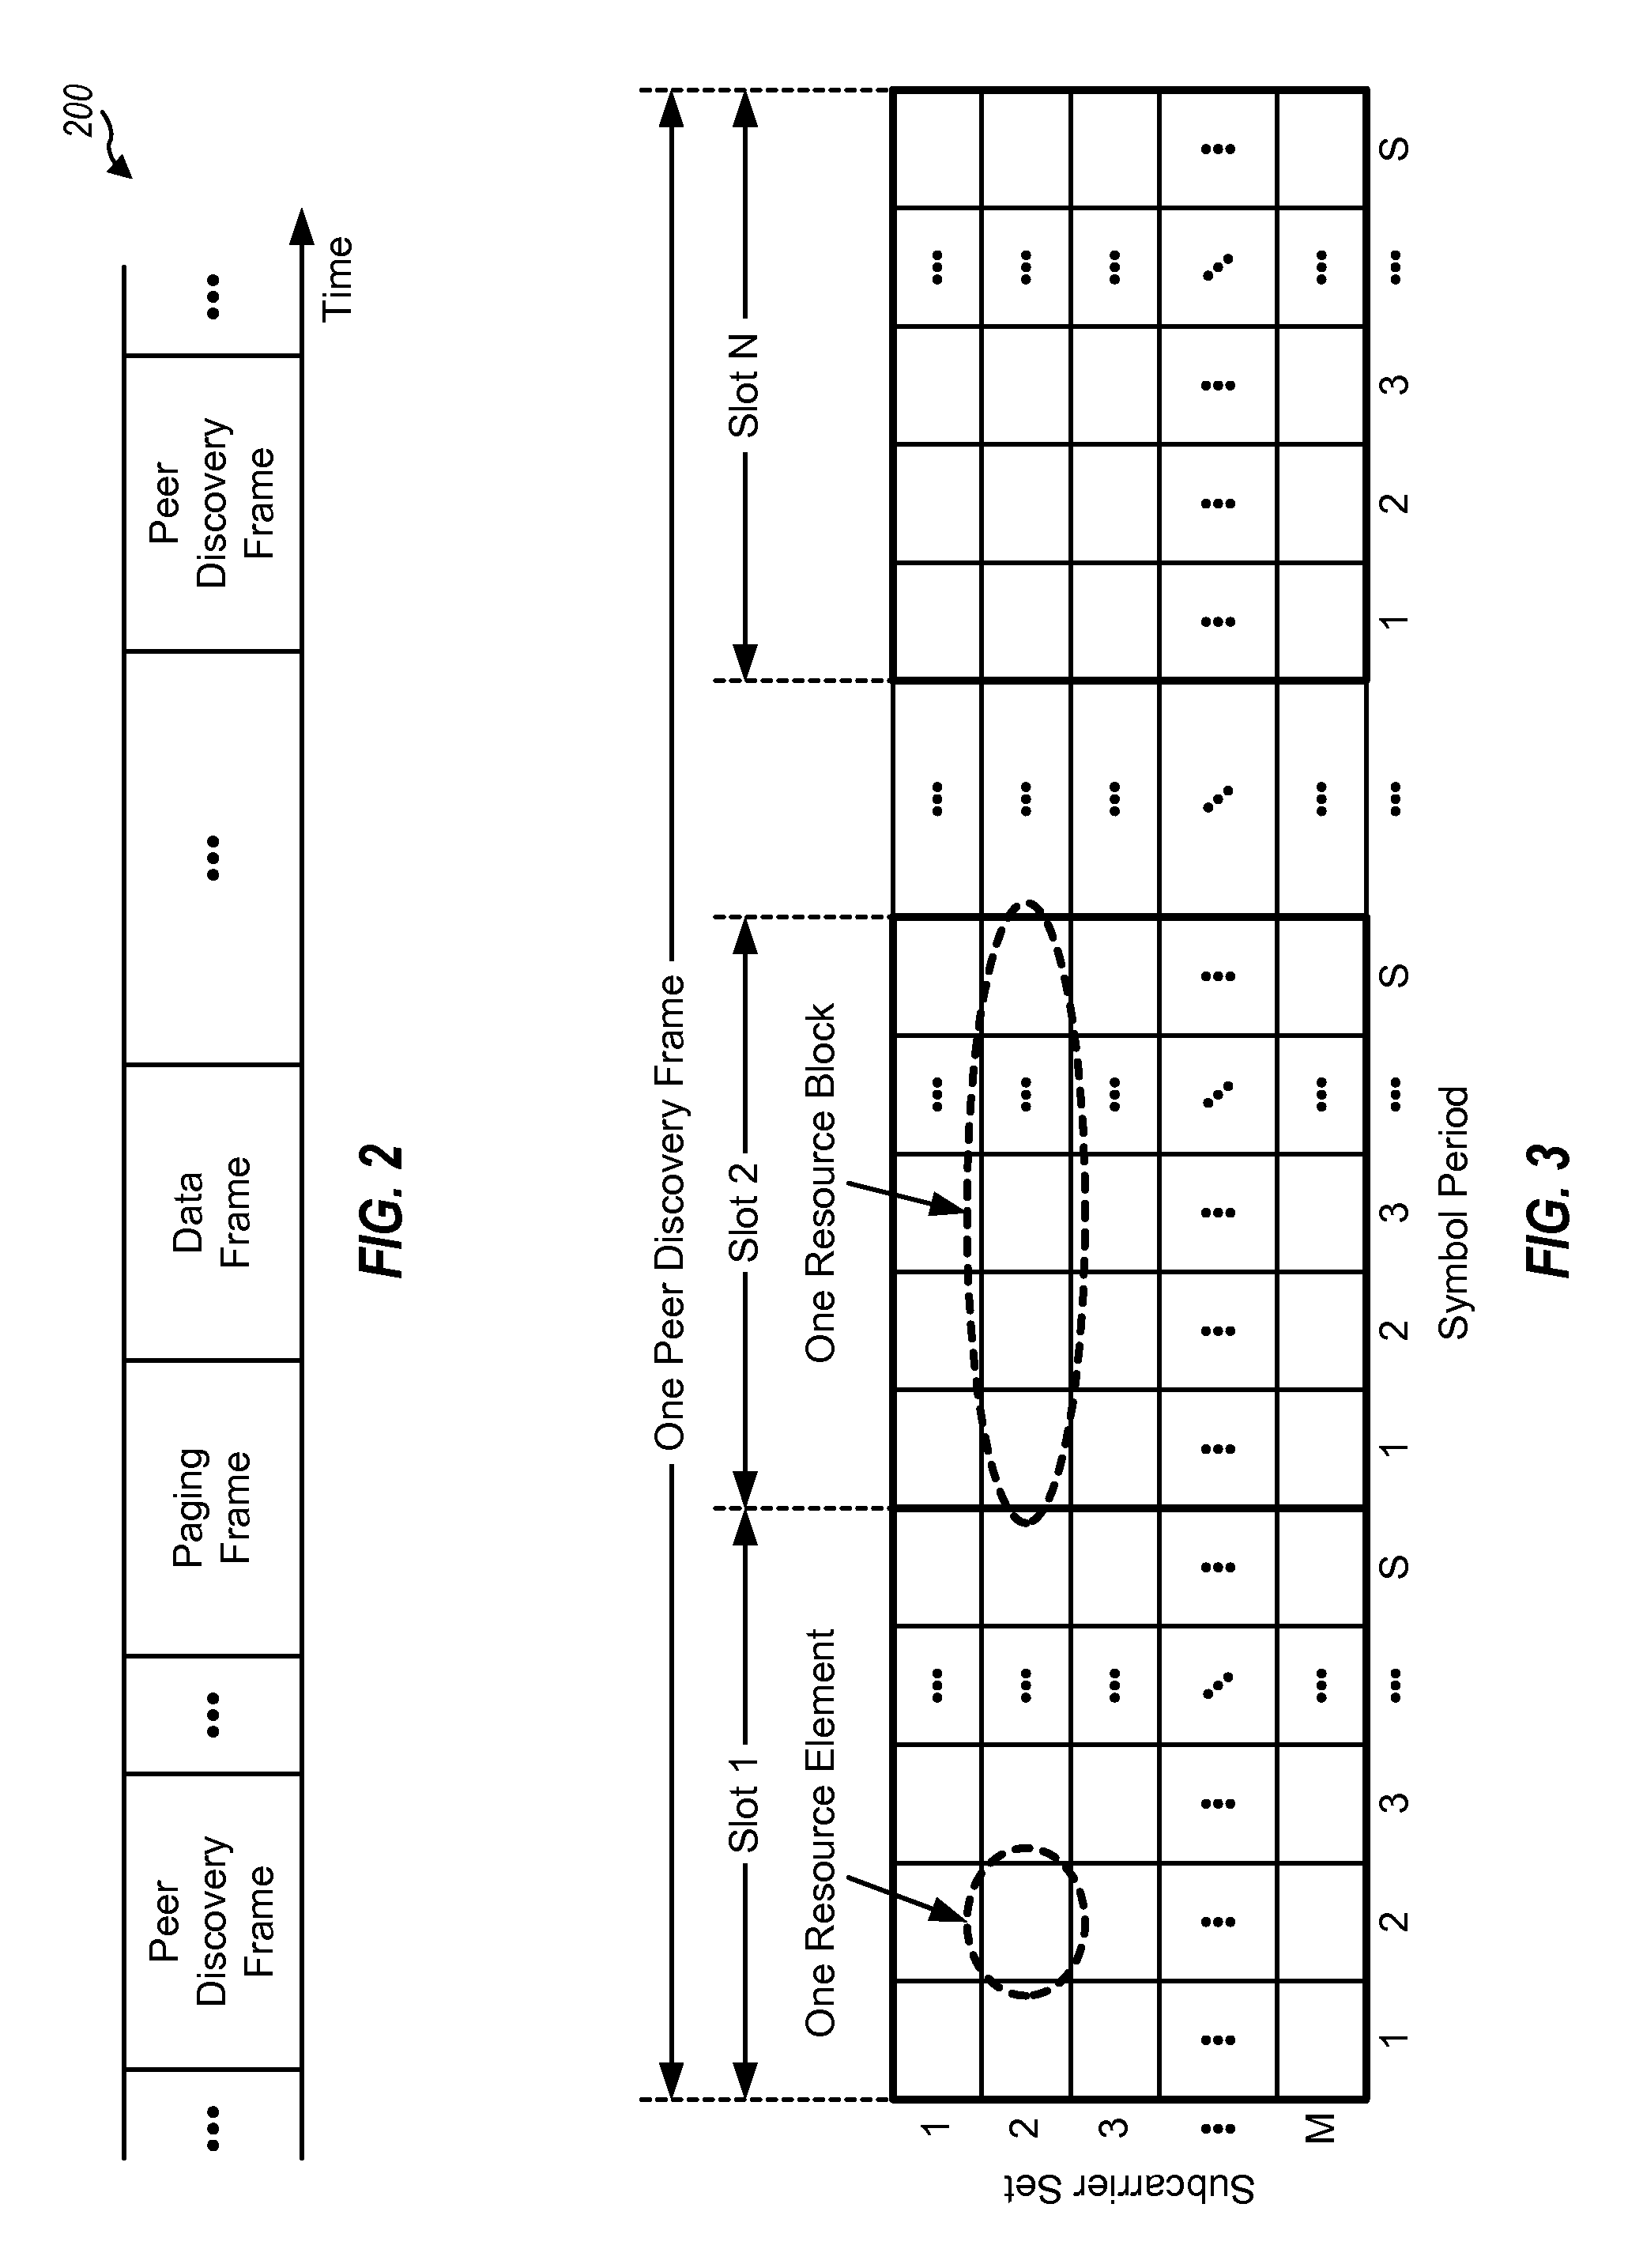 Transmission with collision detection and mitigation for wireless communication